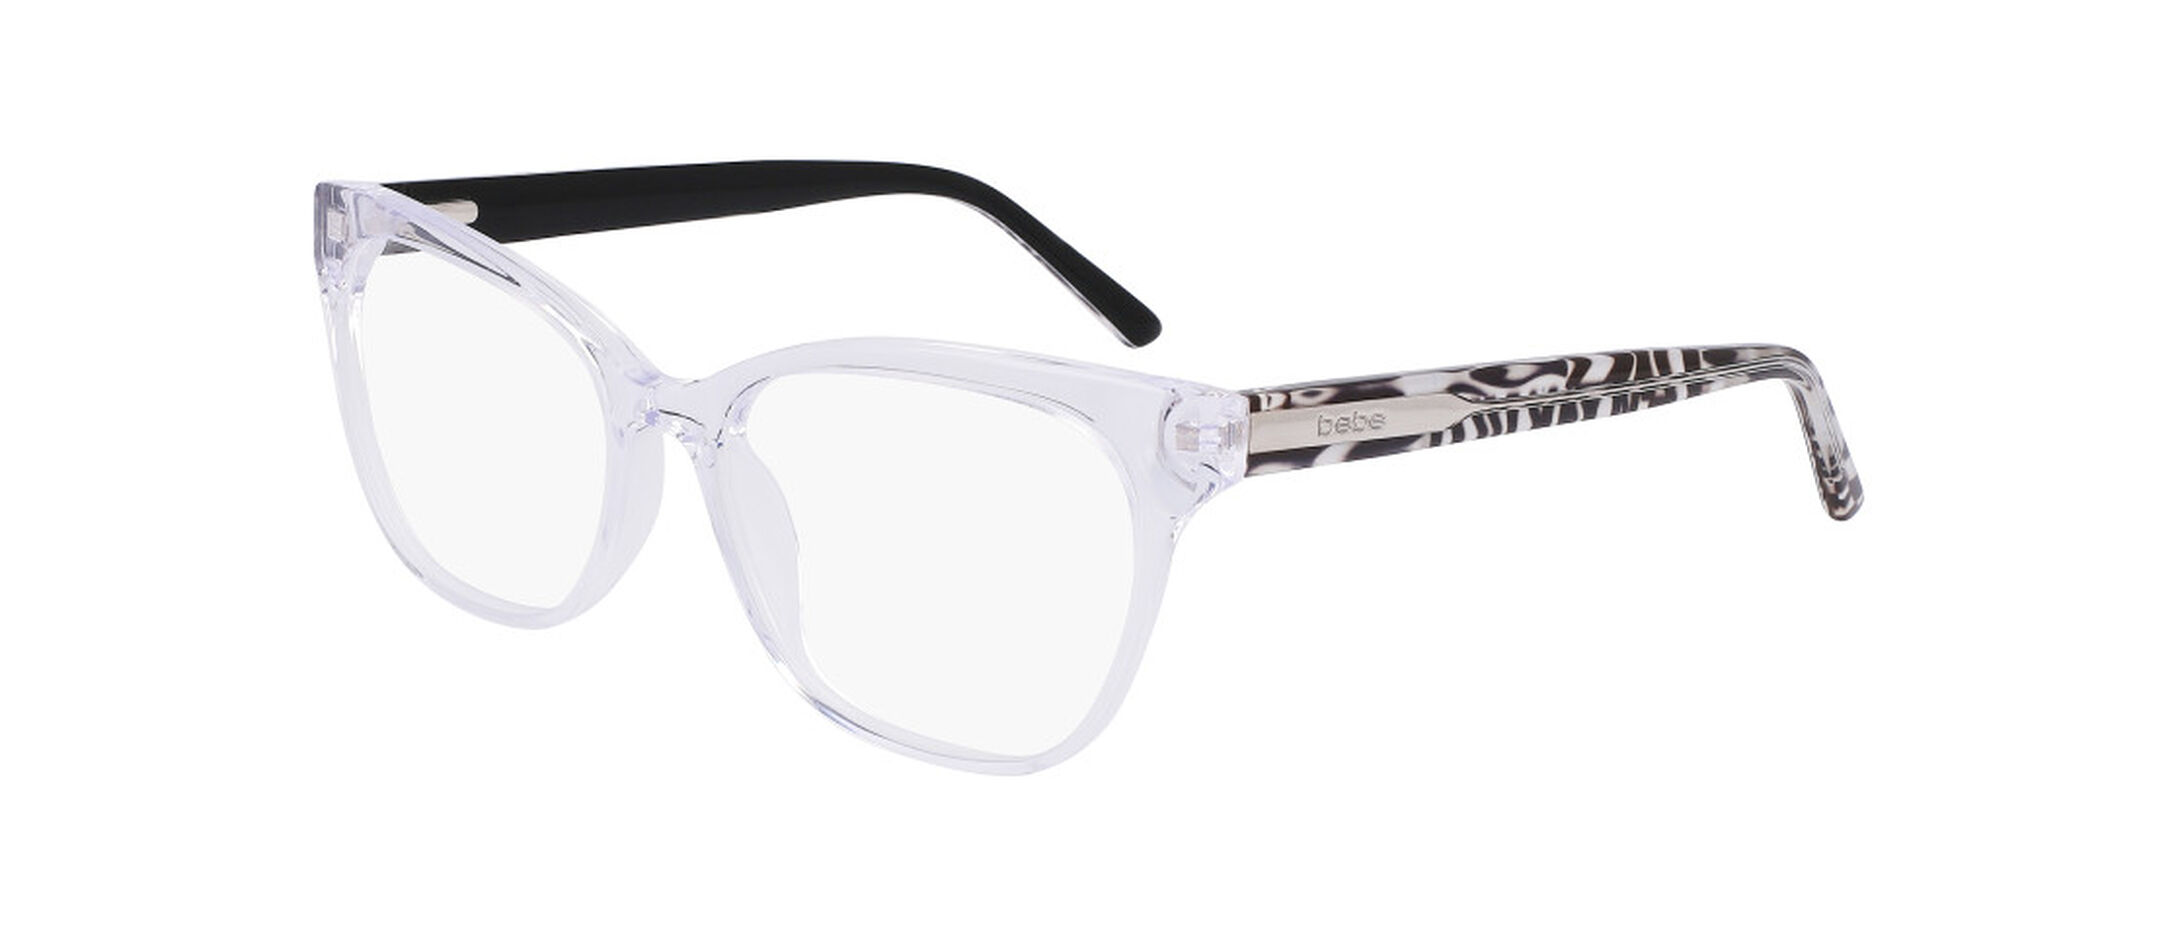 bebe BB5210 Glasses | Free Shipping and Returns | Eyeconic